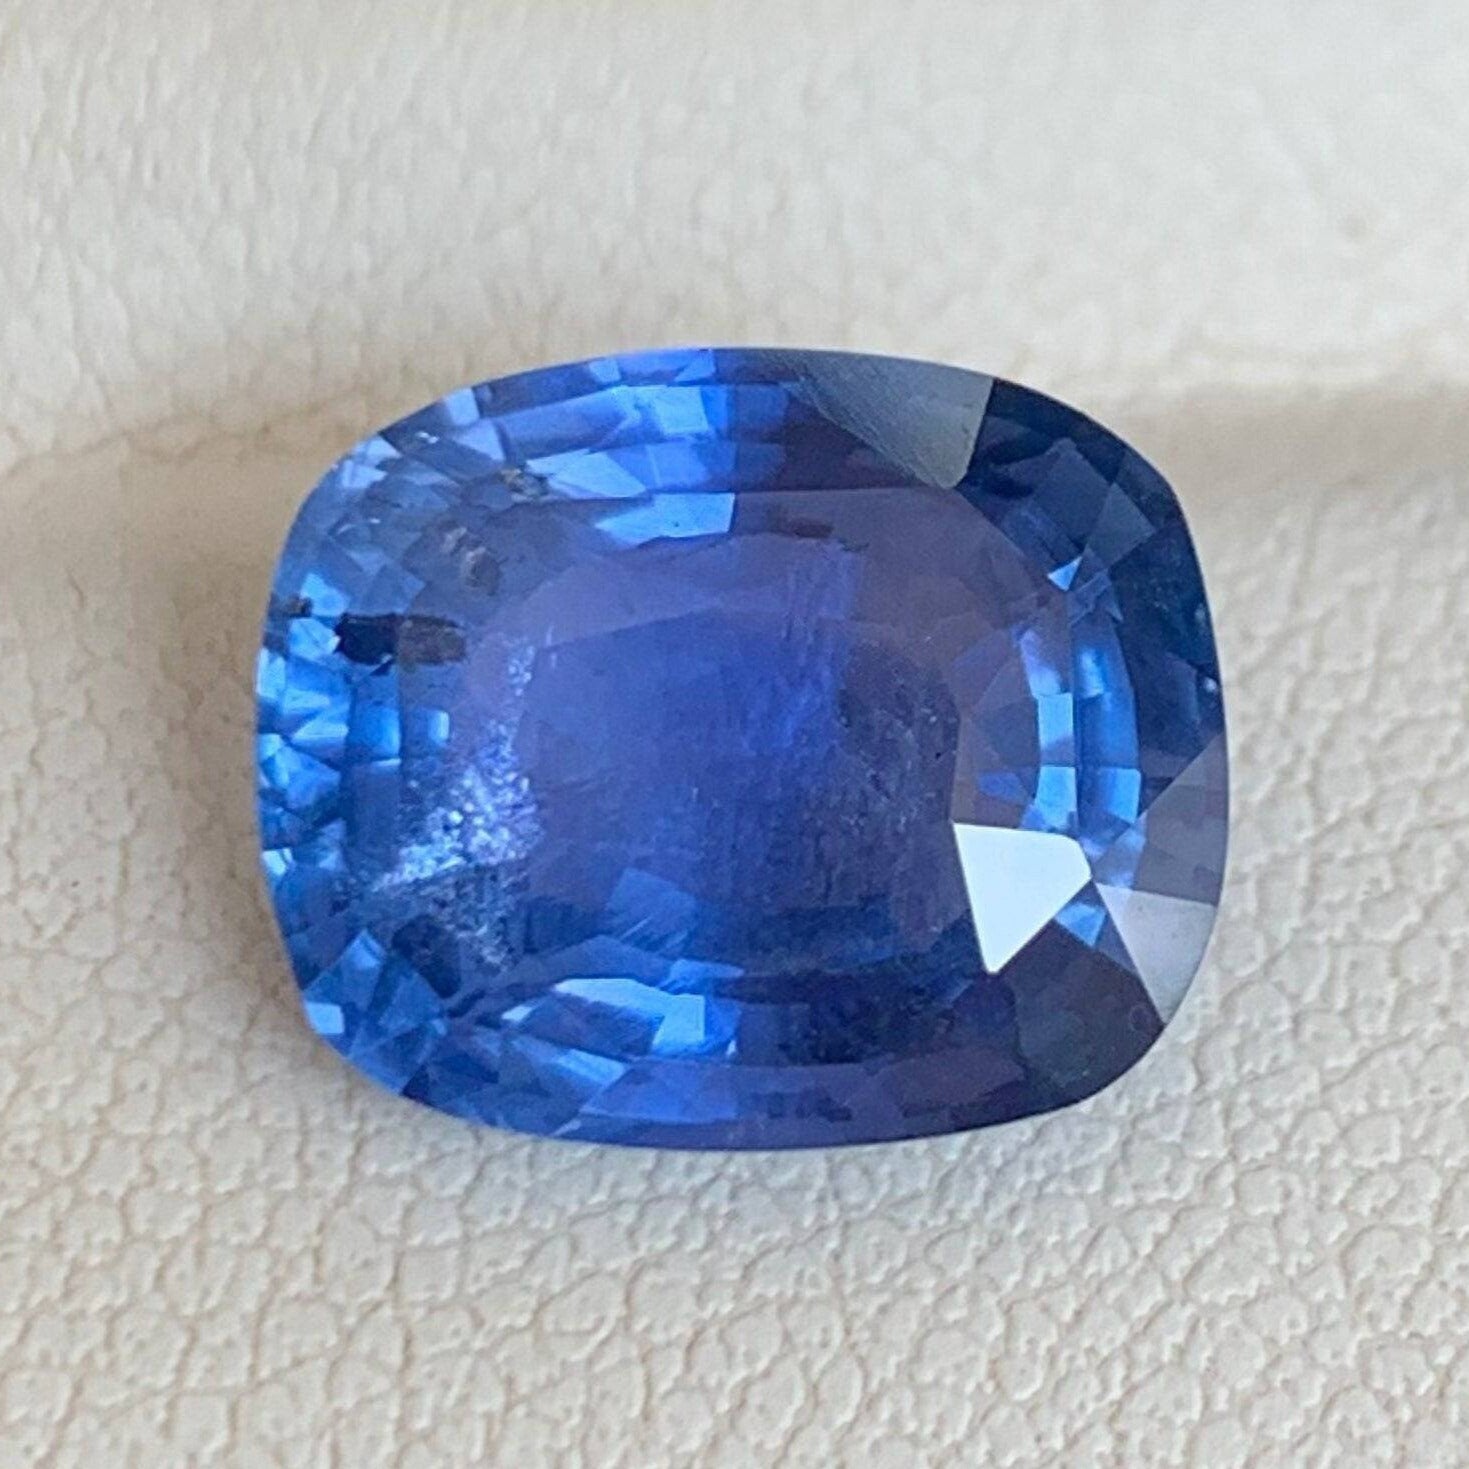 Blue sapphire 5.17 Cts, Unheated Cornflower Blue Sapphire Ceylon Blue sapphire Engagement ring, Ceylon Blue Sapphire, A Gift for her - Baza Boutique 